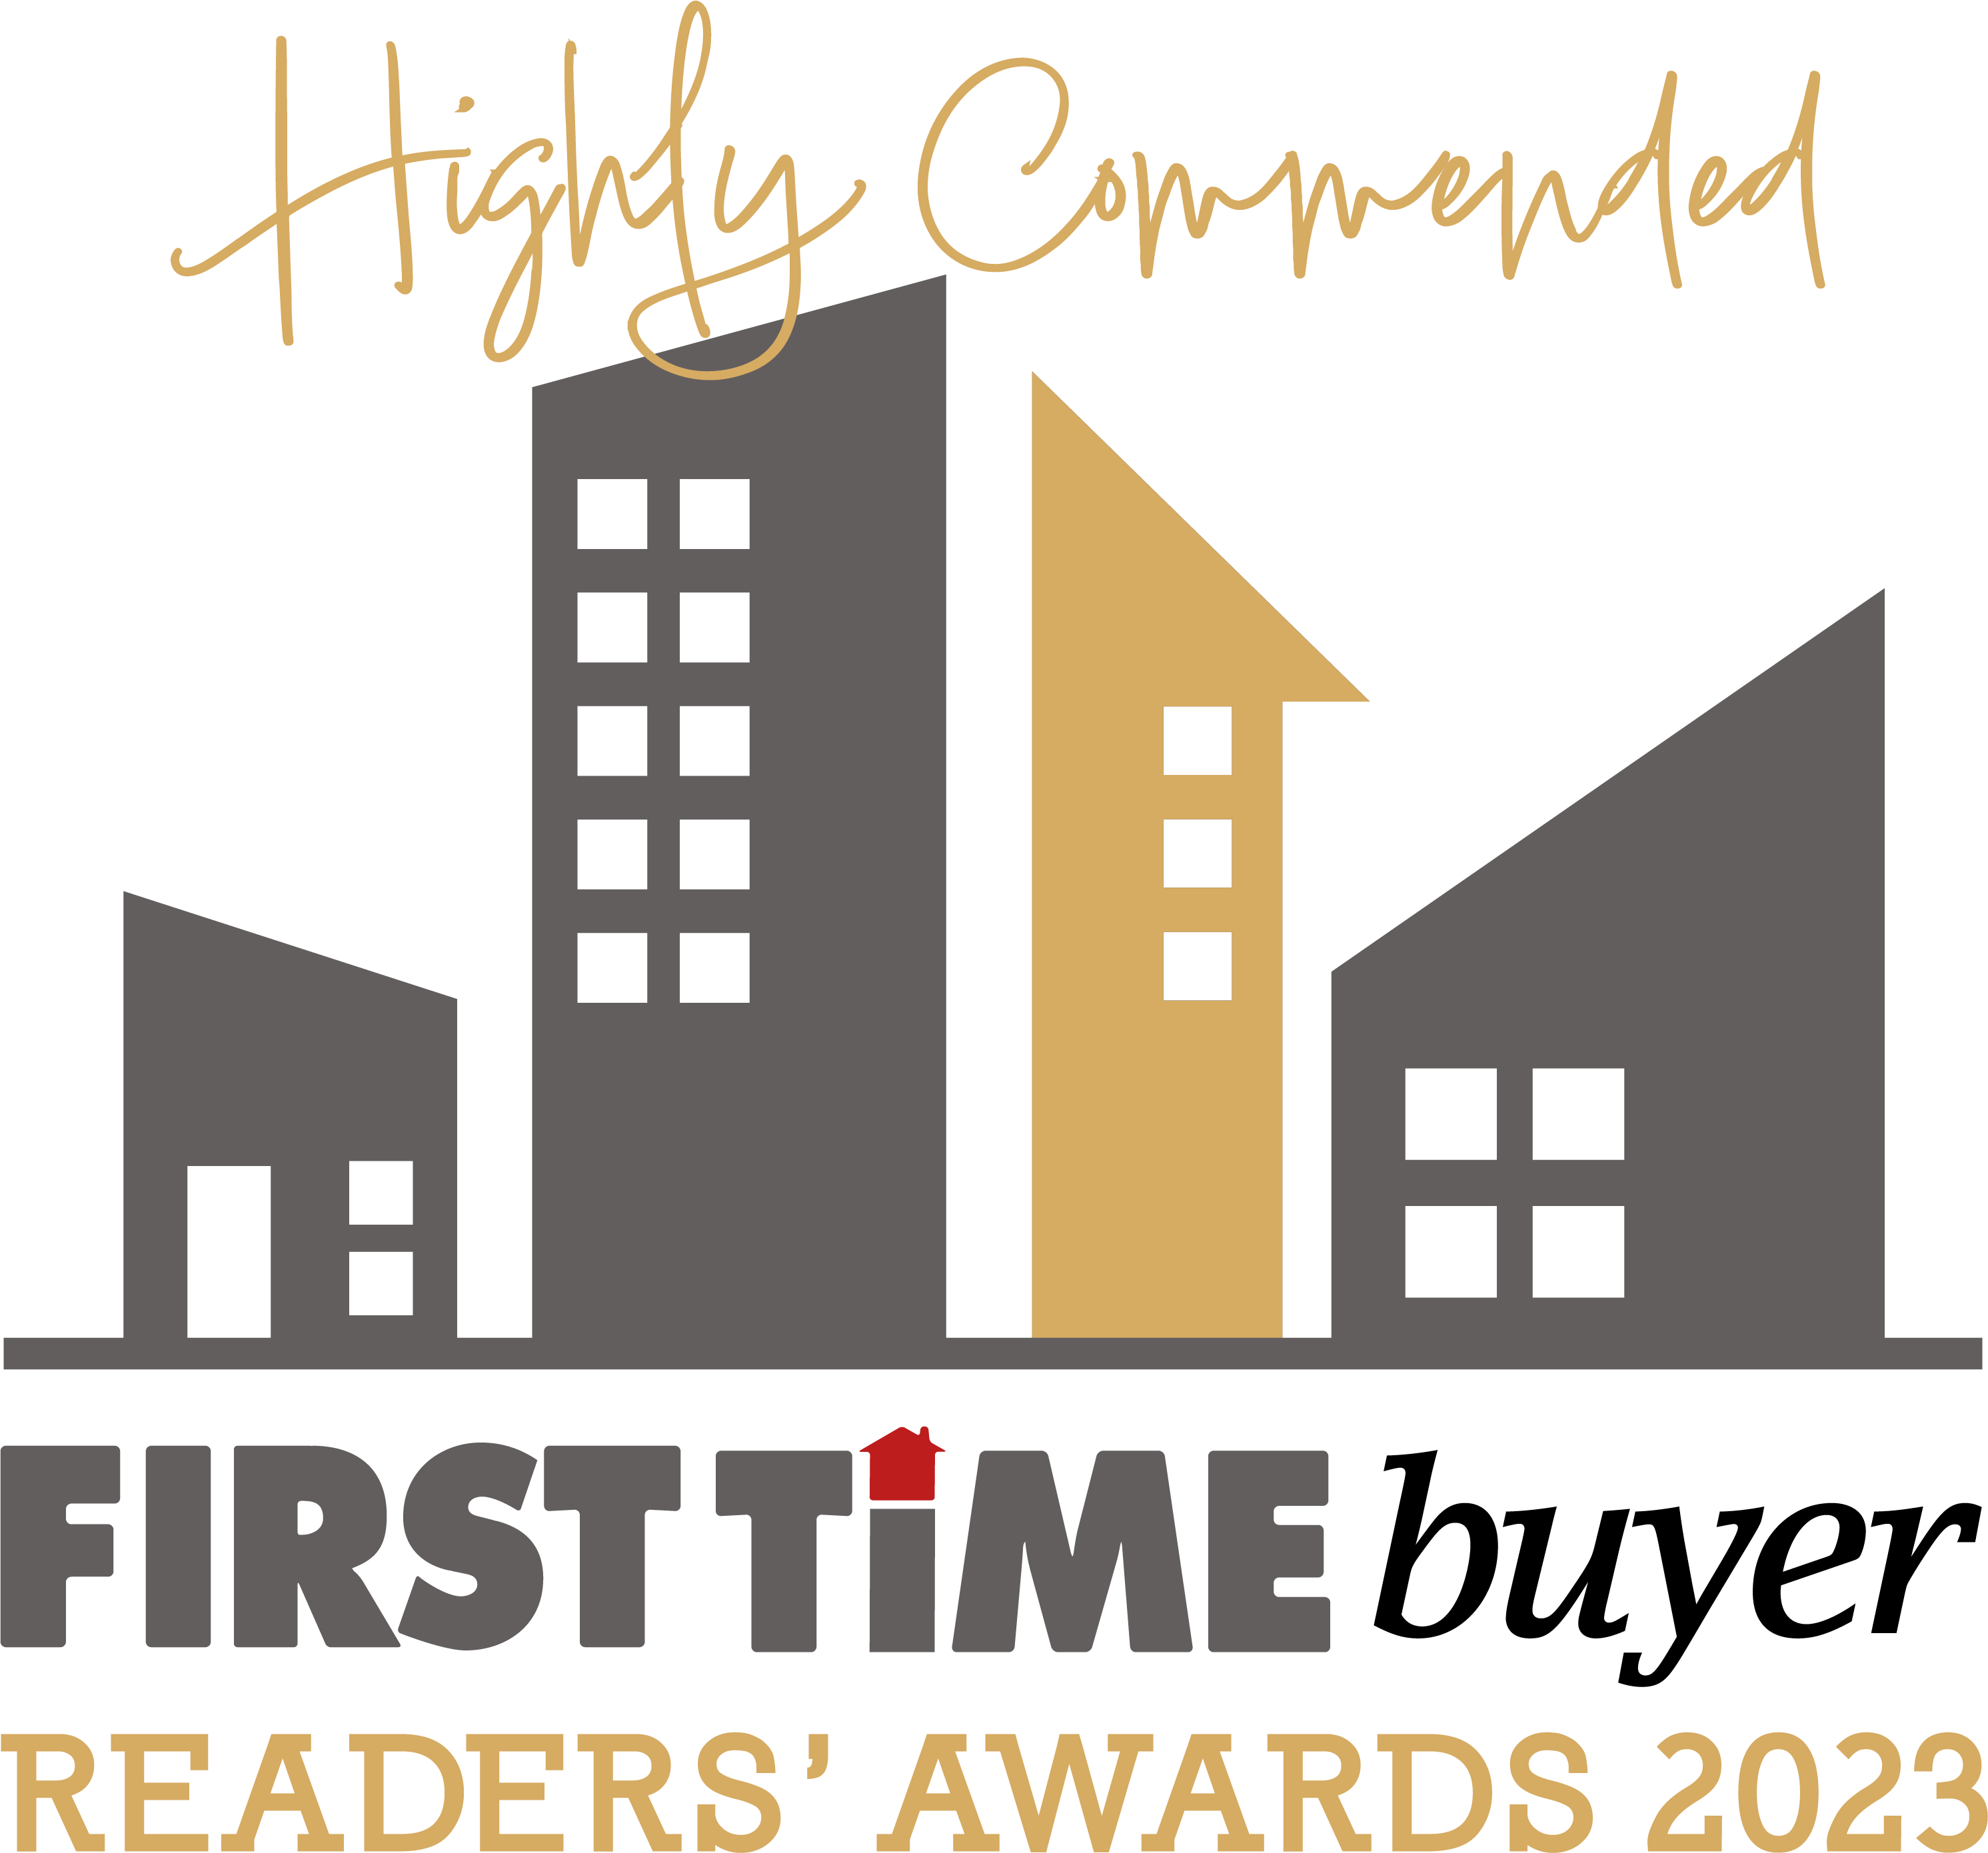 The First Time Buyer Readers' Awards are decided by public vote, making these awards one of the most acclaimed in the industry.